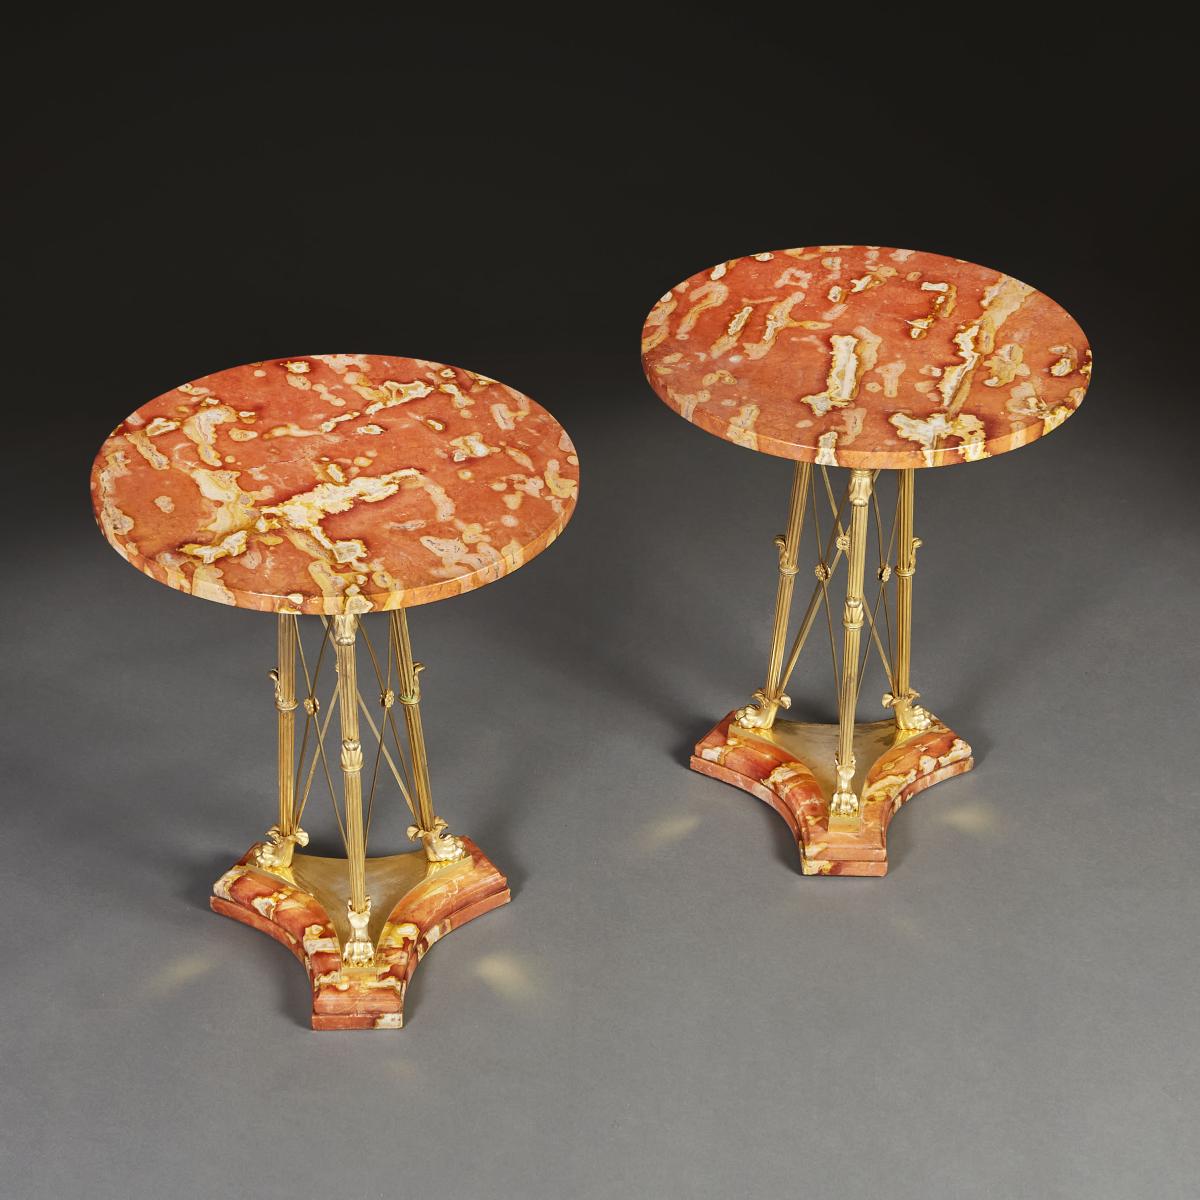 A Fine Pair of Red Marble Occasional Tables